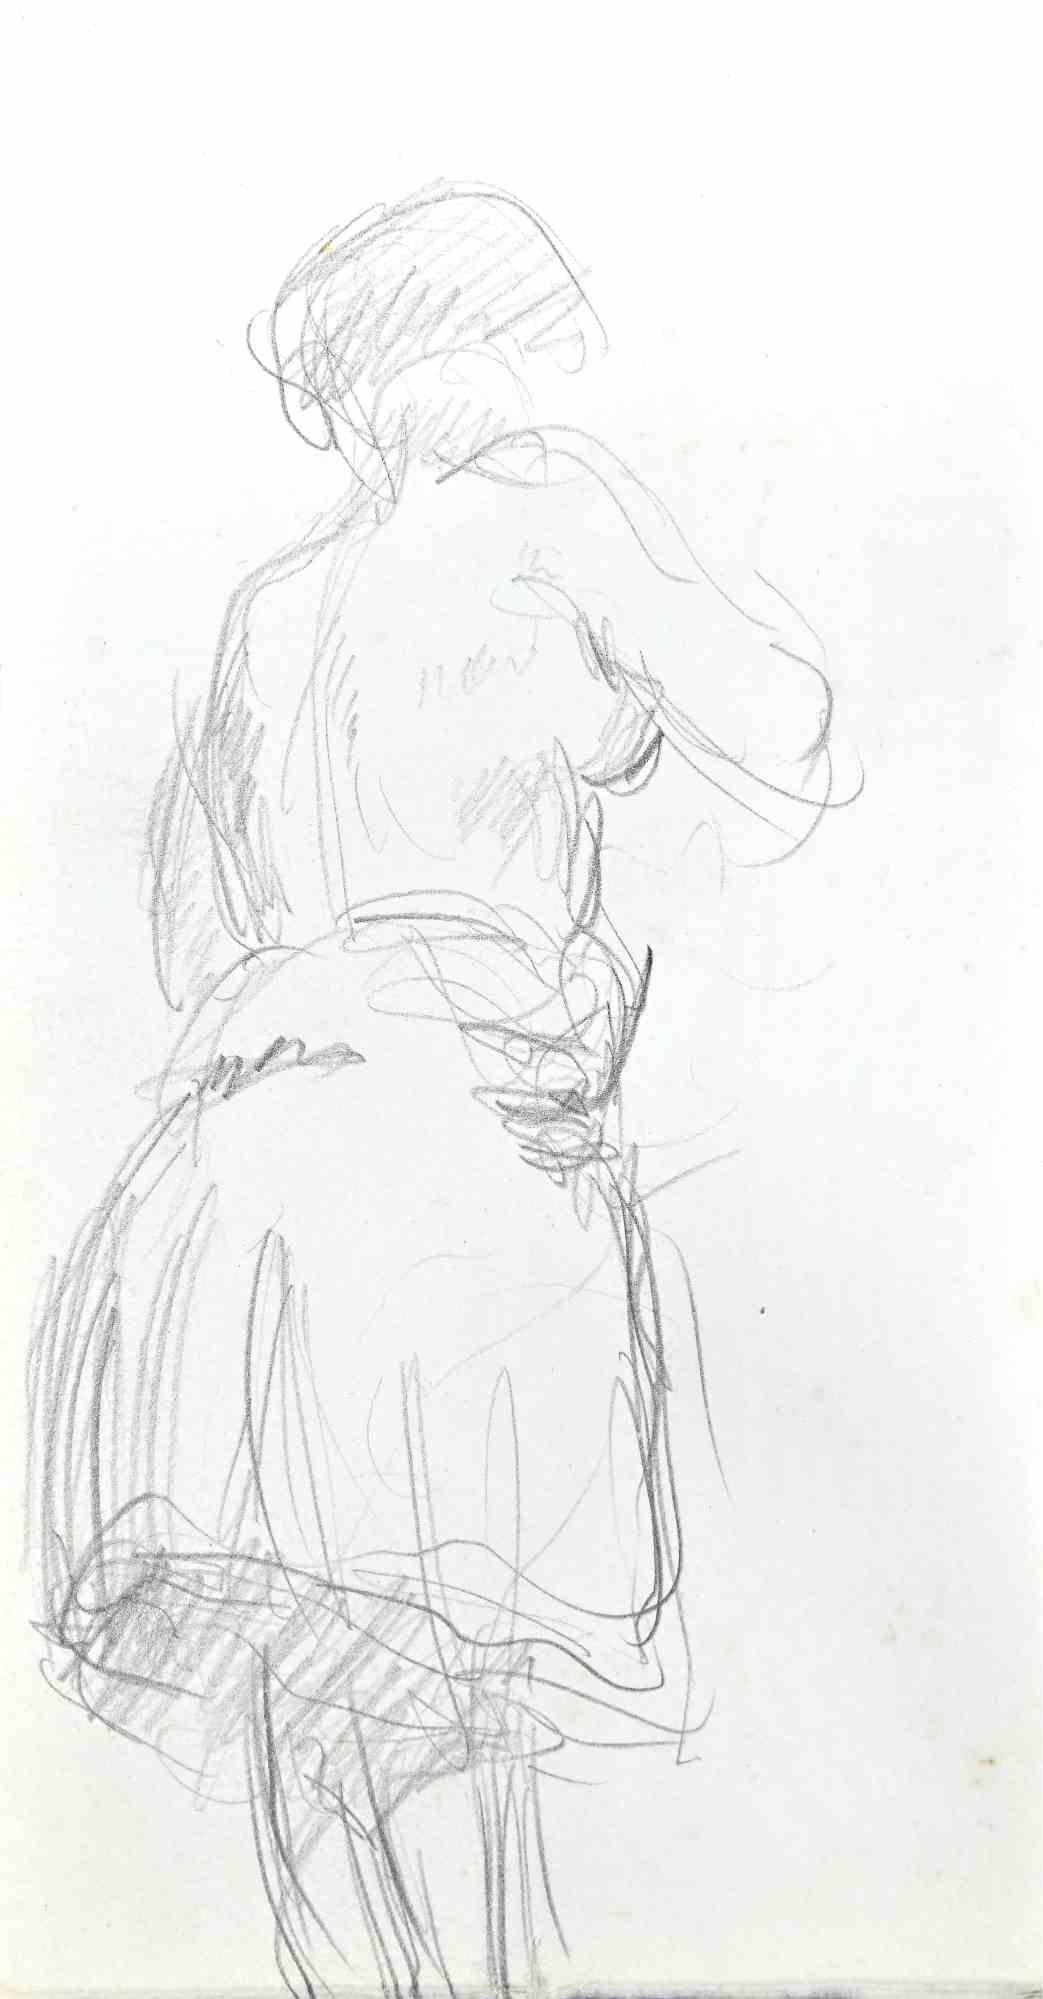 The Posing Nude - Pencil Drawing - Mid-20th Century